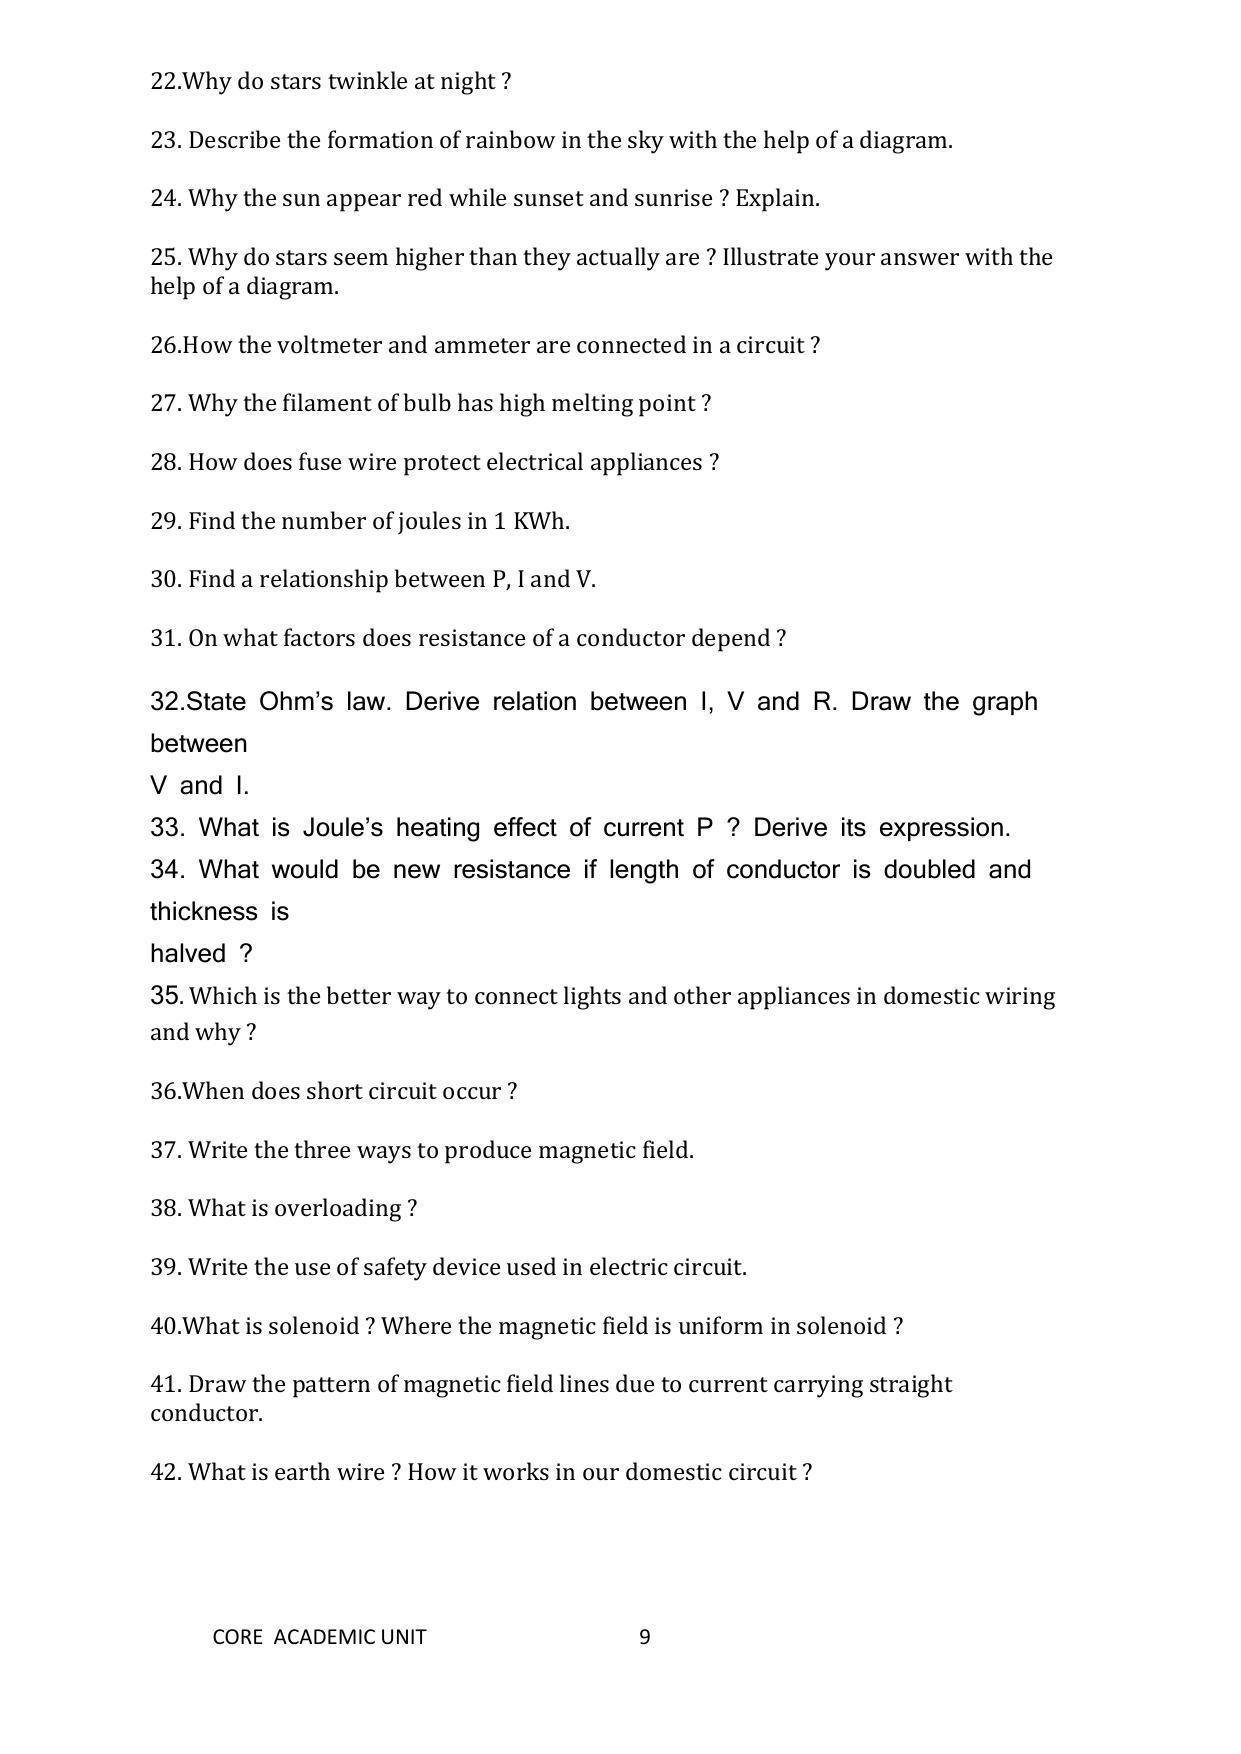 Edudel Class 10 Science Question Bank - Page 9